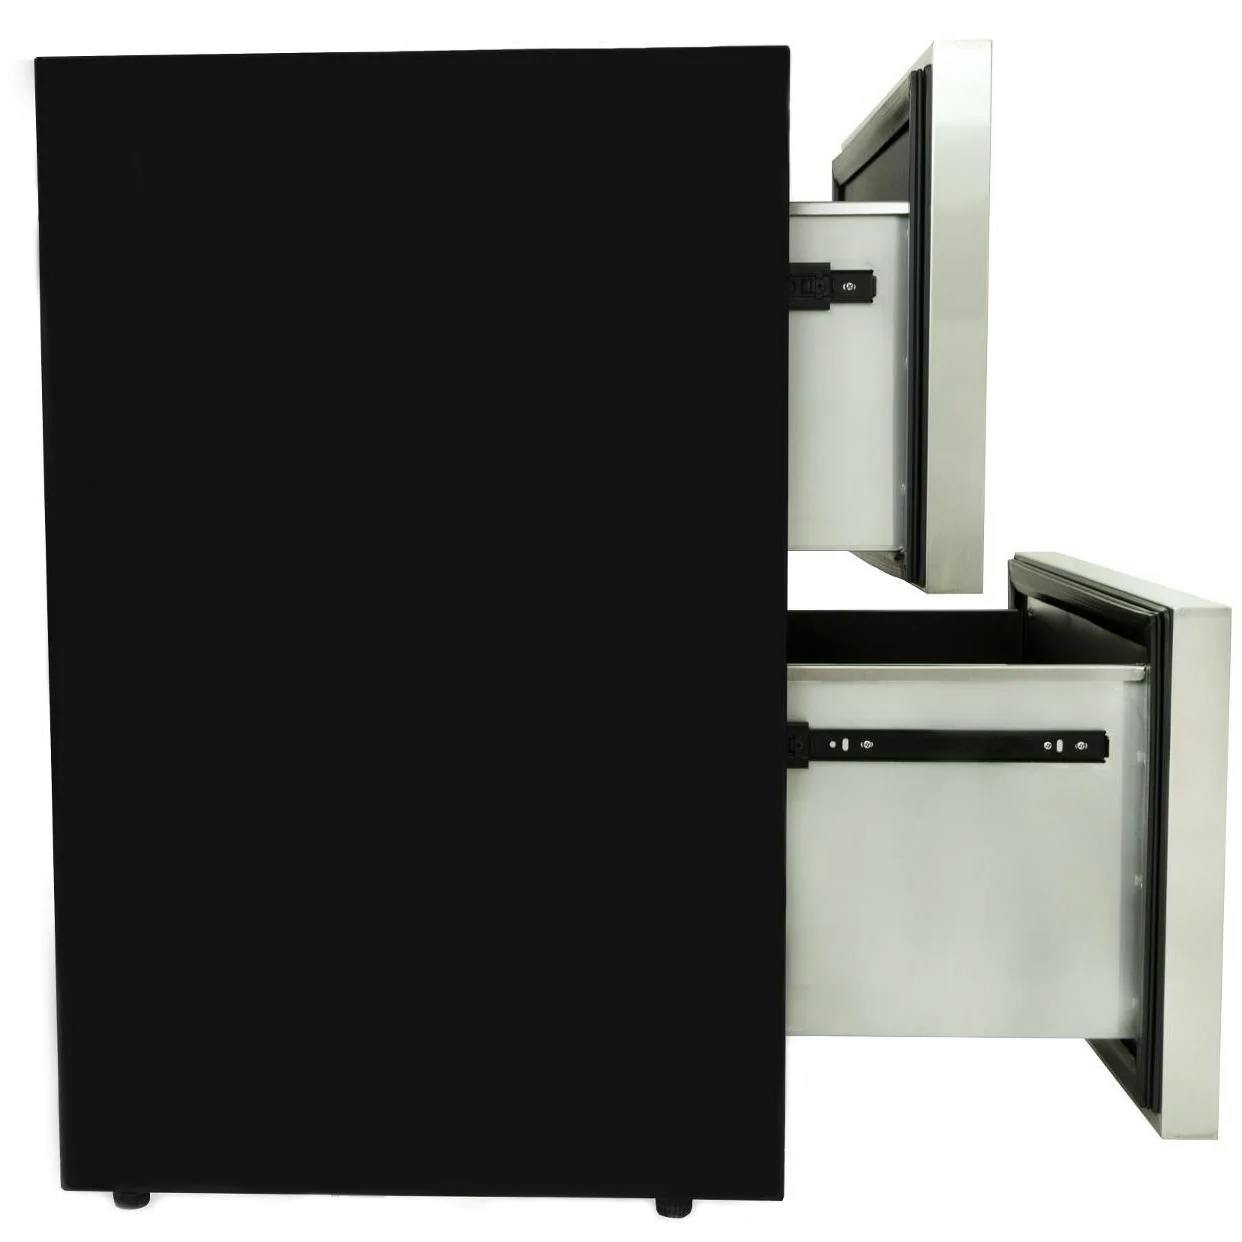 Blaze Outdoor Rated Double Drawer Refrigerator